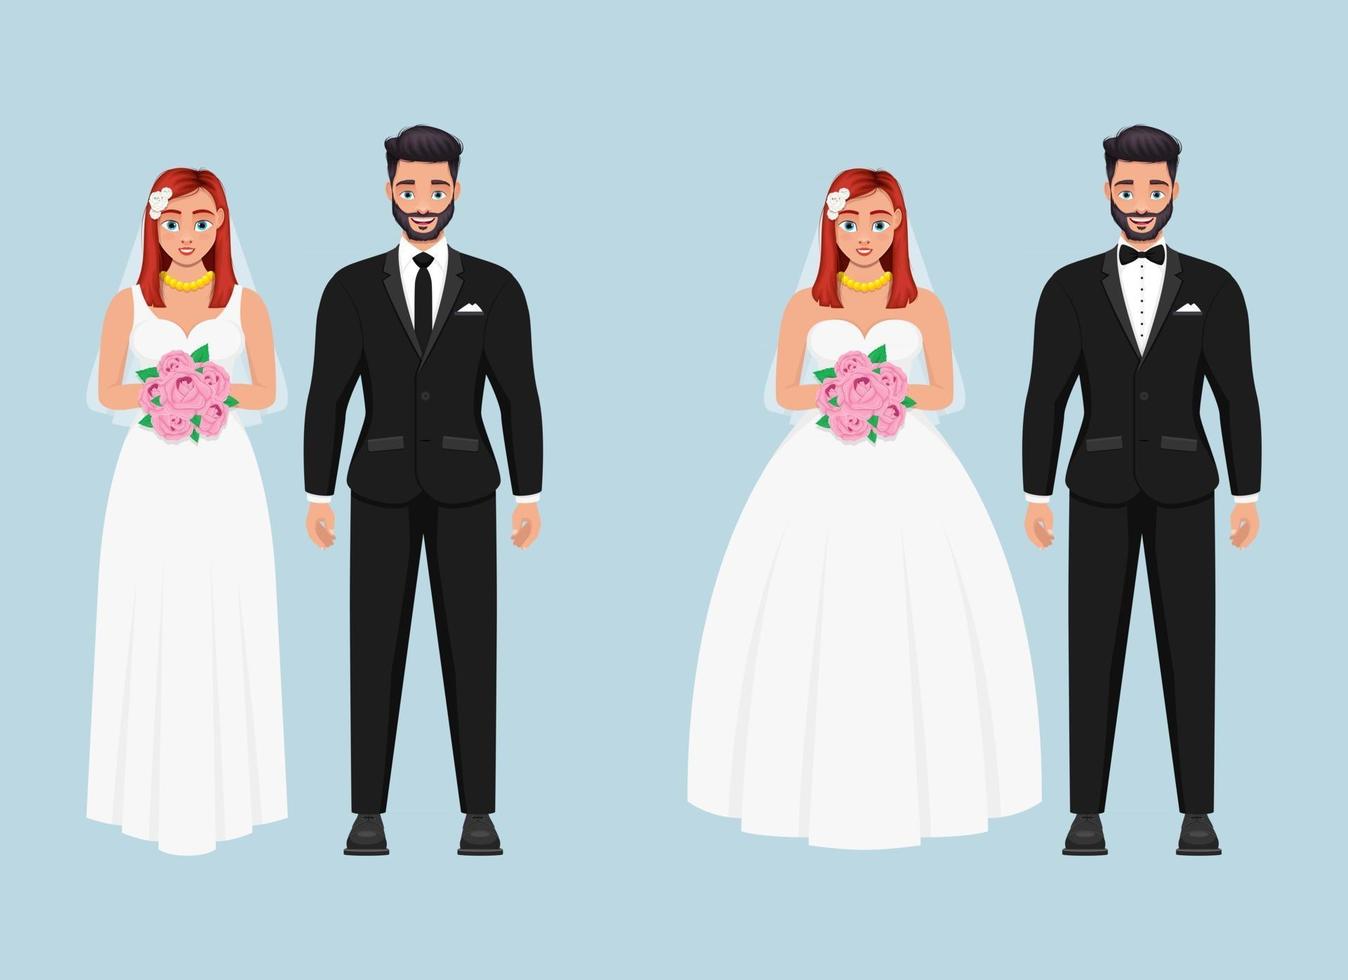 Bride and groom vector design illustration isolated on blue background